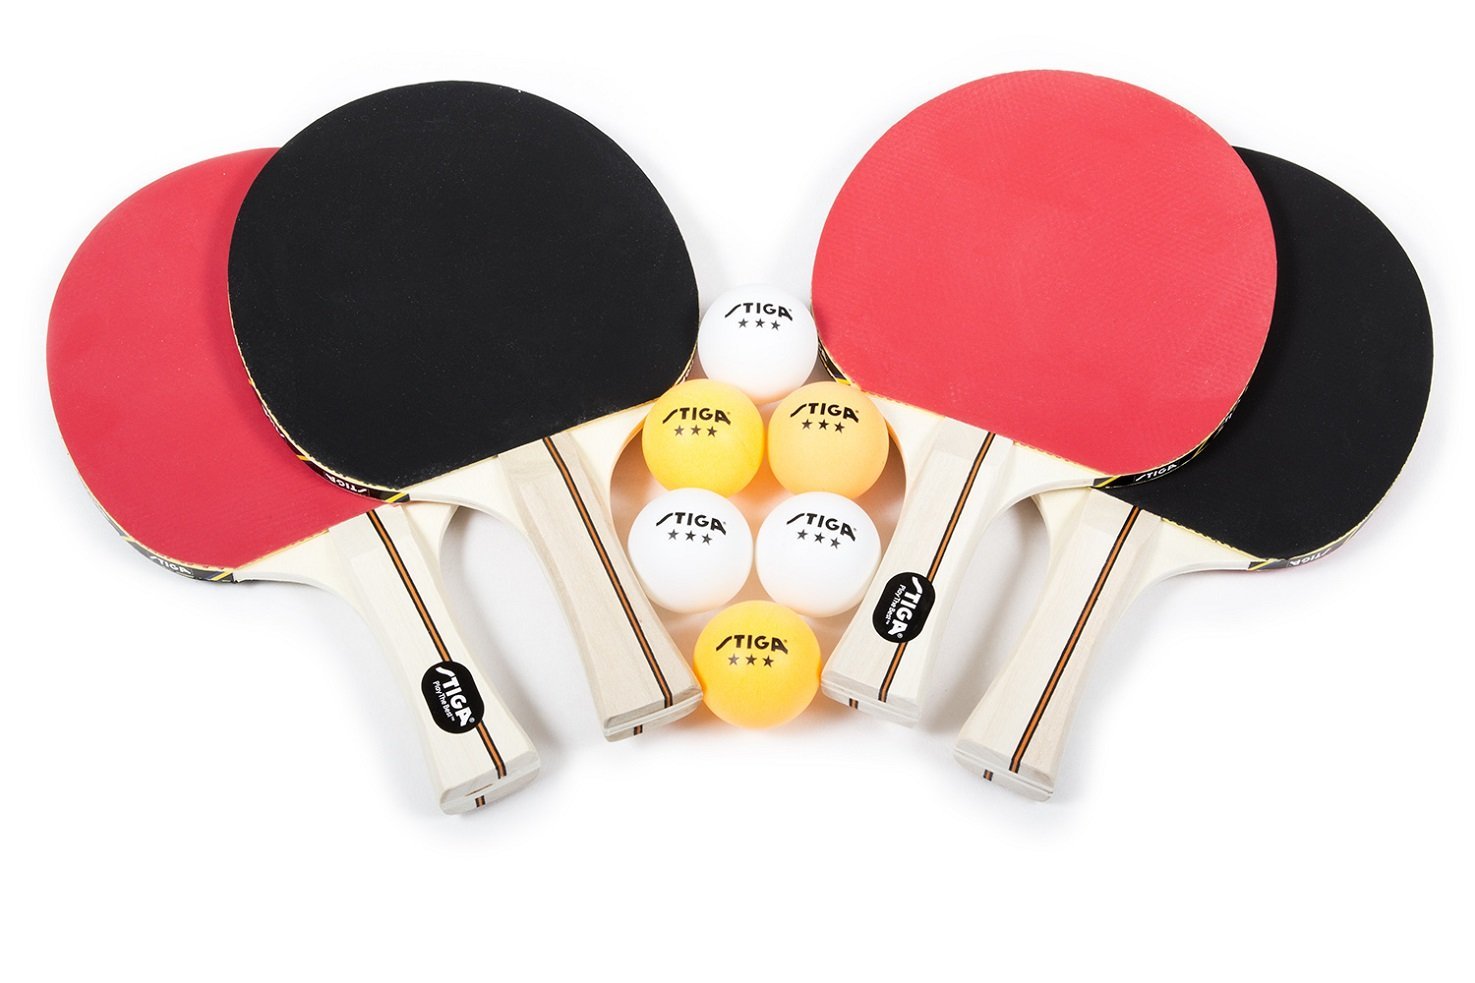 Details about   Ping Pong Paddles Table Tennis Set 4 Player Professional Racket Paddle 8 Balls 